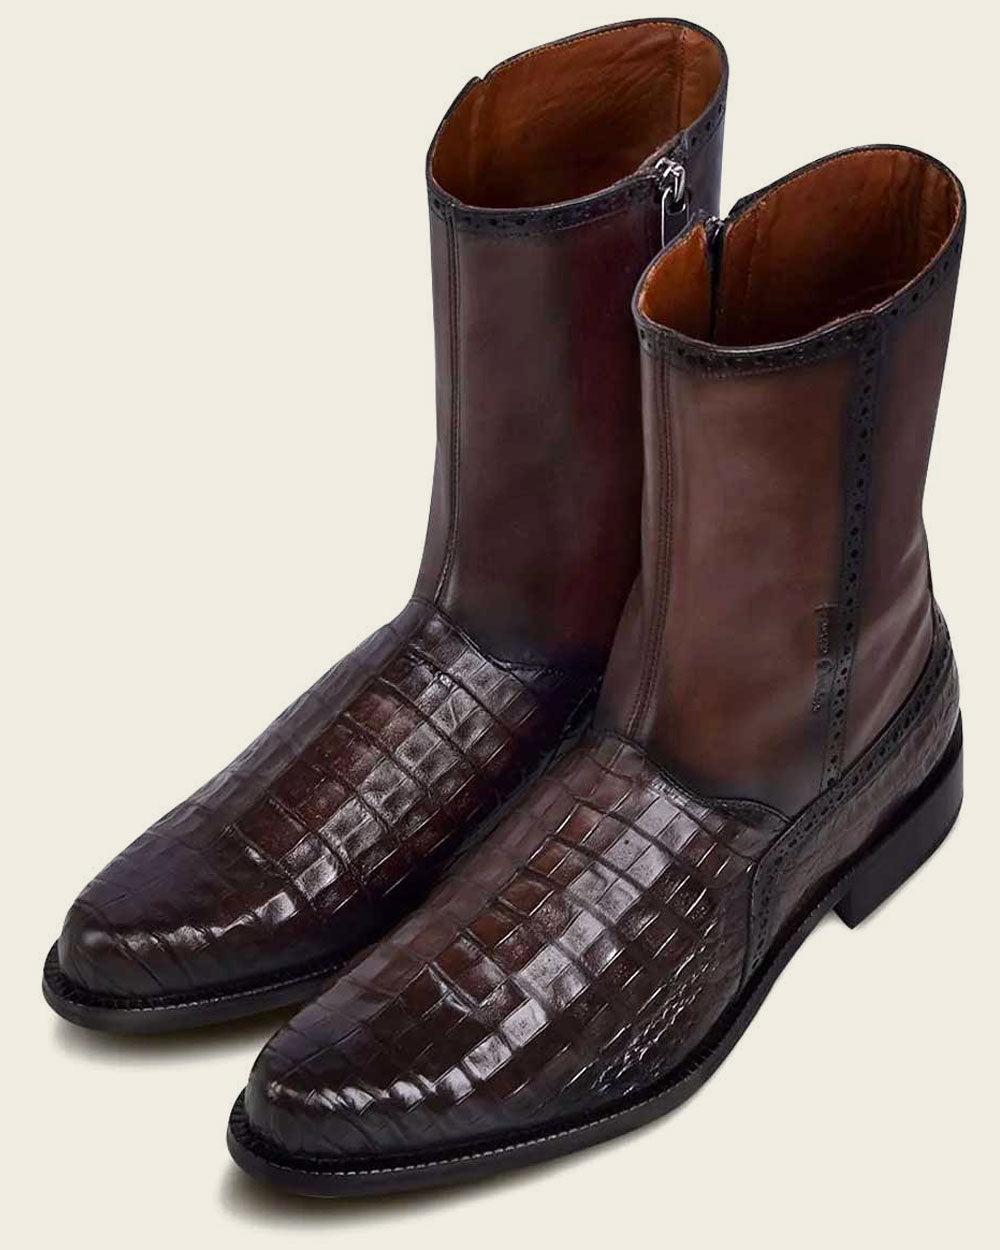 Cayman & bovine leather: Experience a fusion of textures in these Cuadra boots.